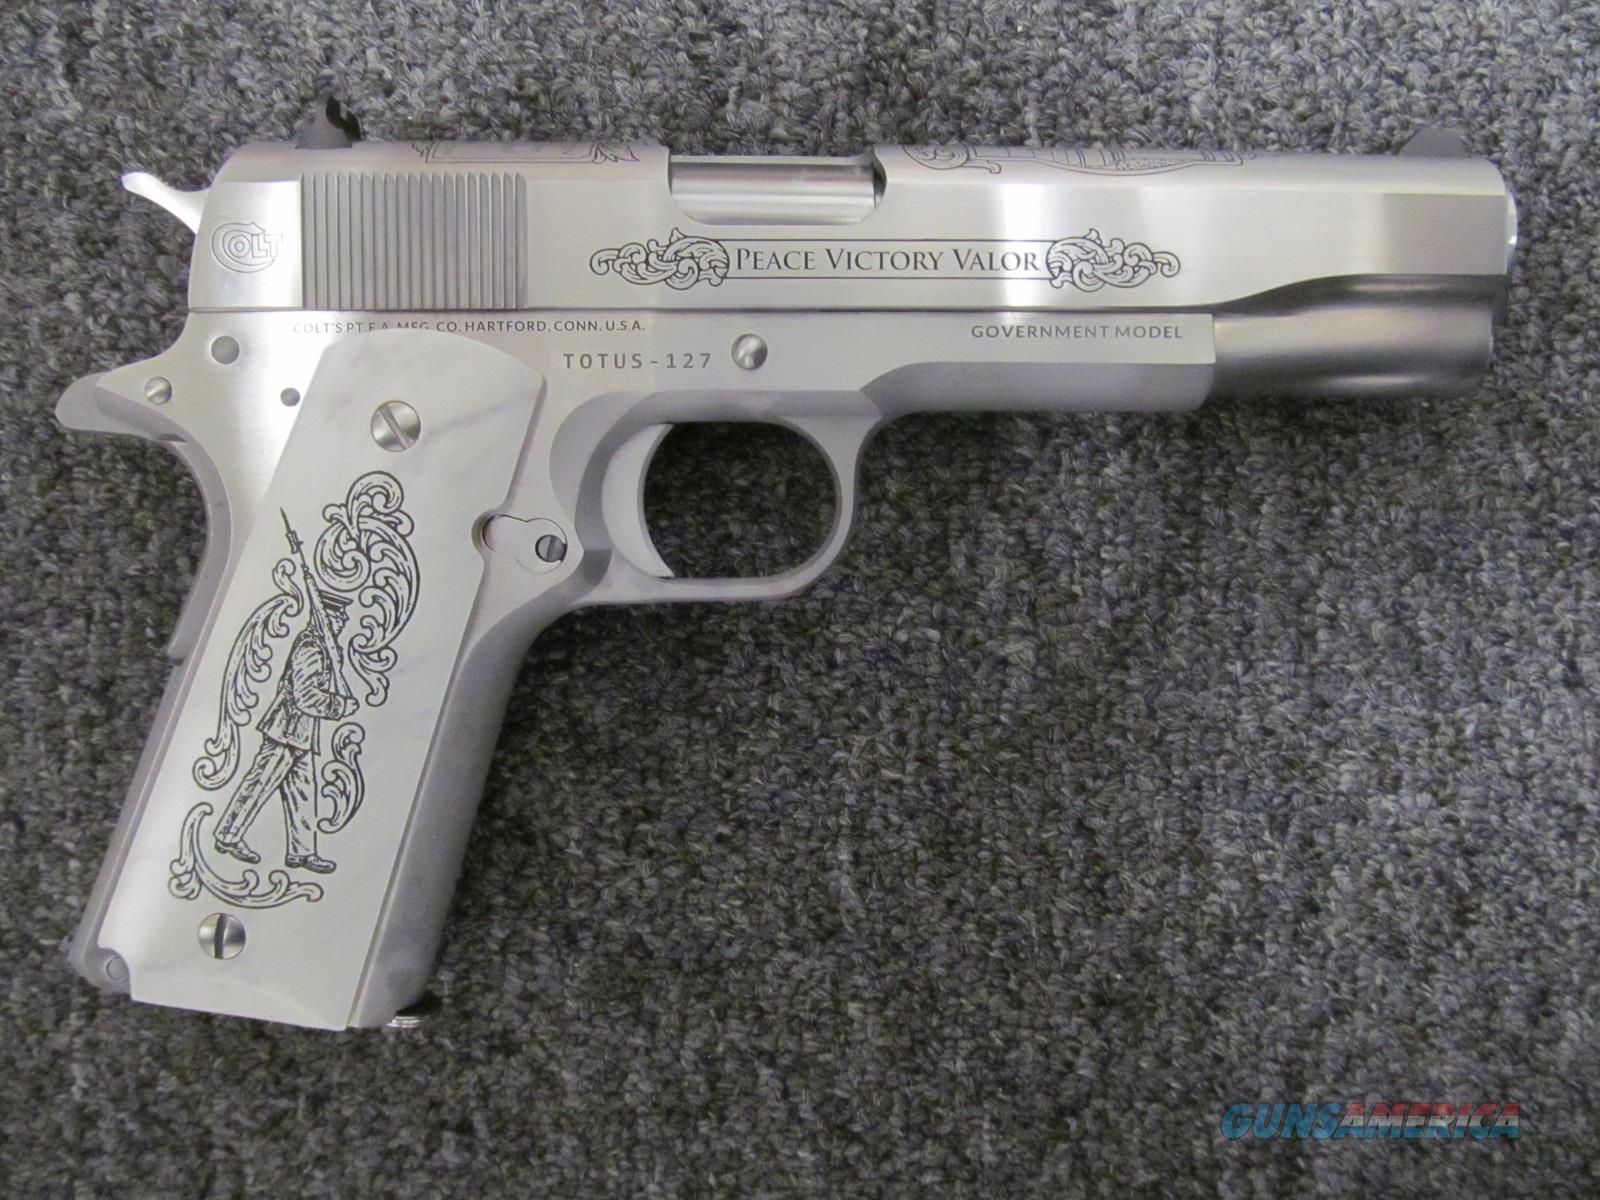 Colt 1911 Tomb of the Unknown Soldi for sale at